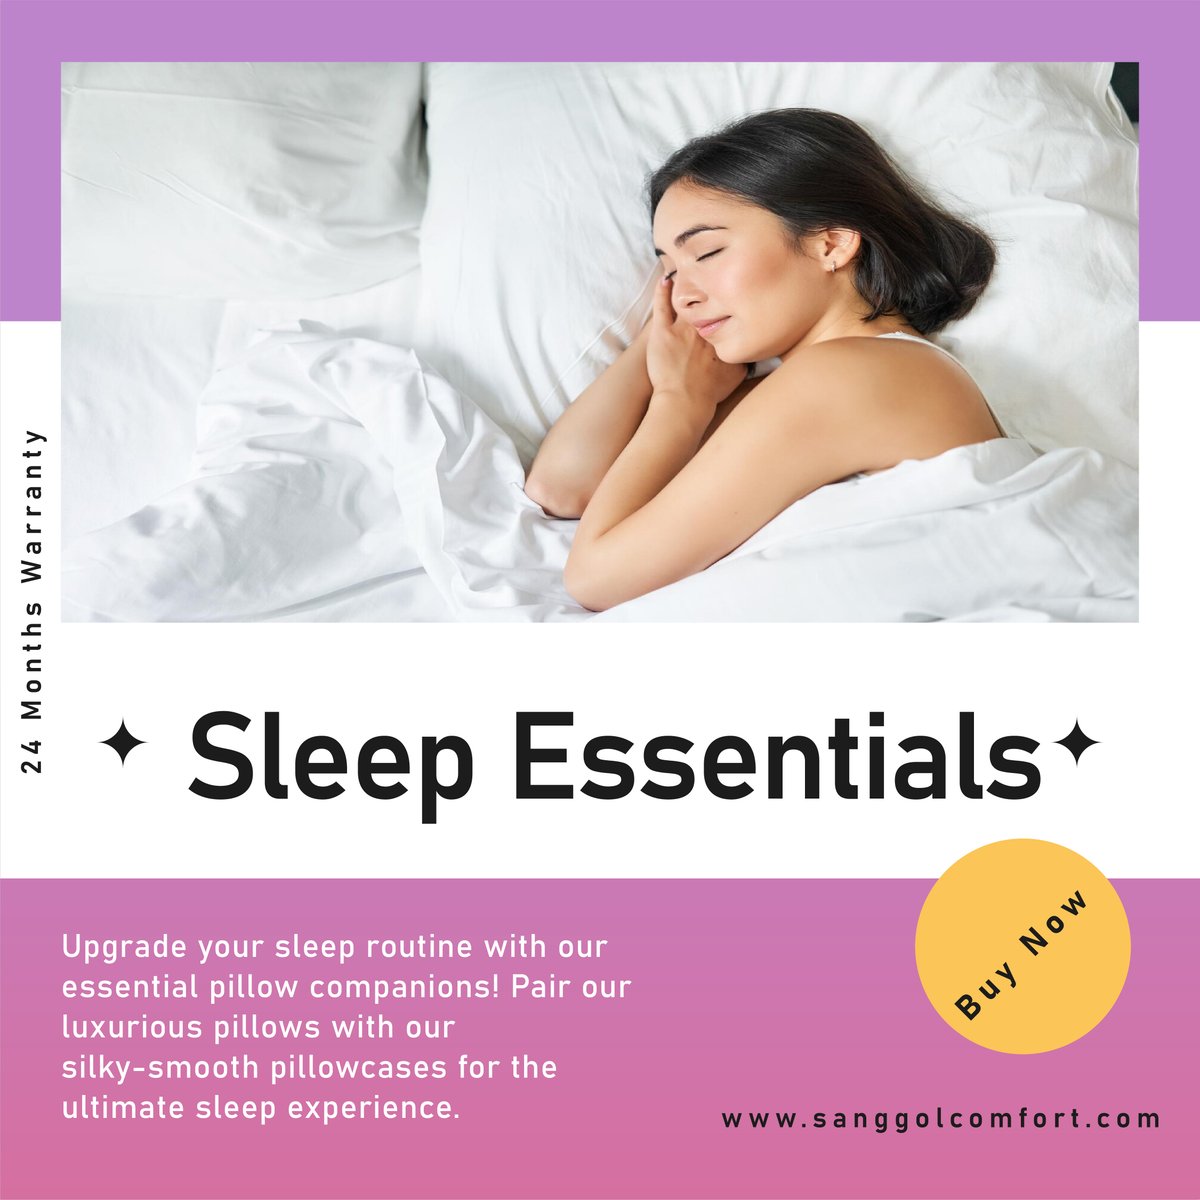 Transform your bedroom into a haven of tranquility with our sleeping essentials! 🌟 Indulge in the luxury of soft, breathable linens and supportive pillows for a sleep experience like no other 💪😴
#SleepingEssentials #BedtimeBliss #SleepBetter #DreamyNights #RestfulSleep